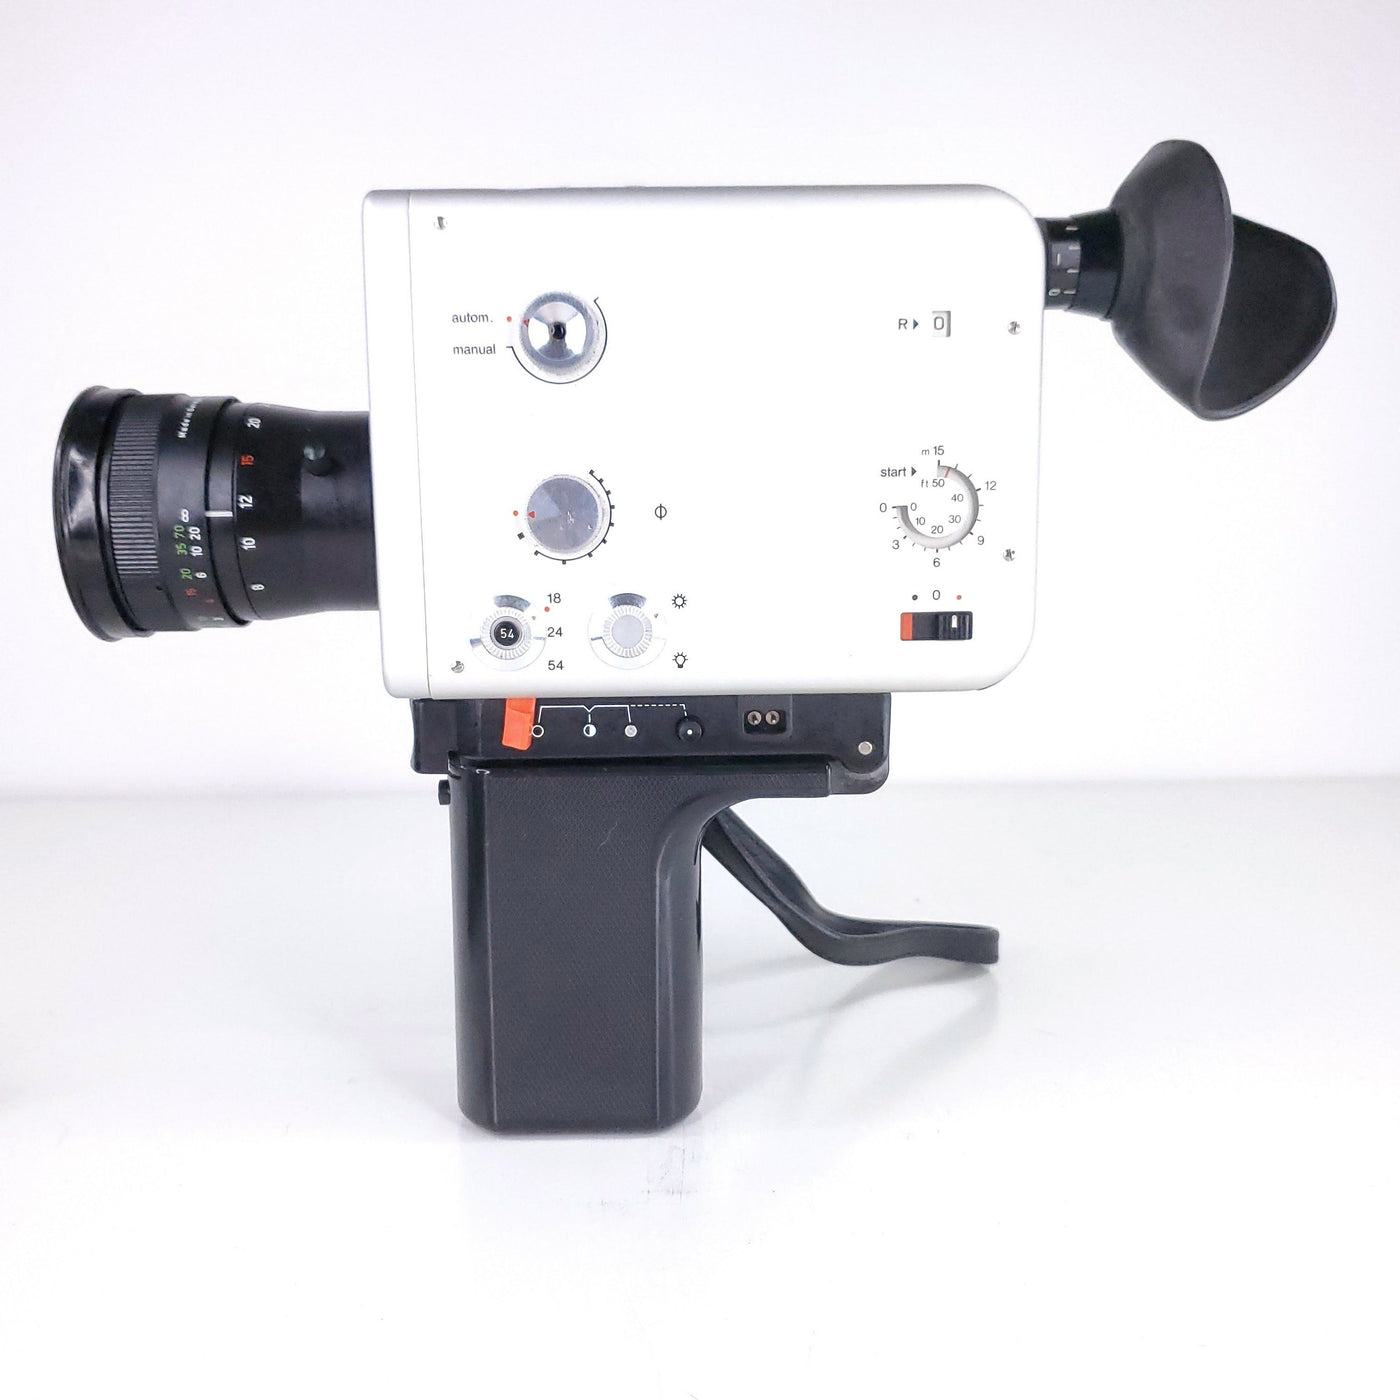 Nizo S480 Super 8 Camera Fully Tested and Functioning  - Includes Light meter battery adapters, Lens Cap, & Leather Bag